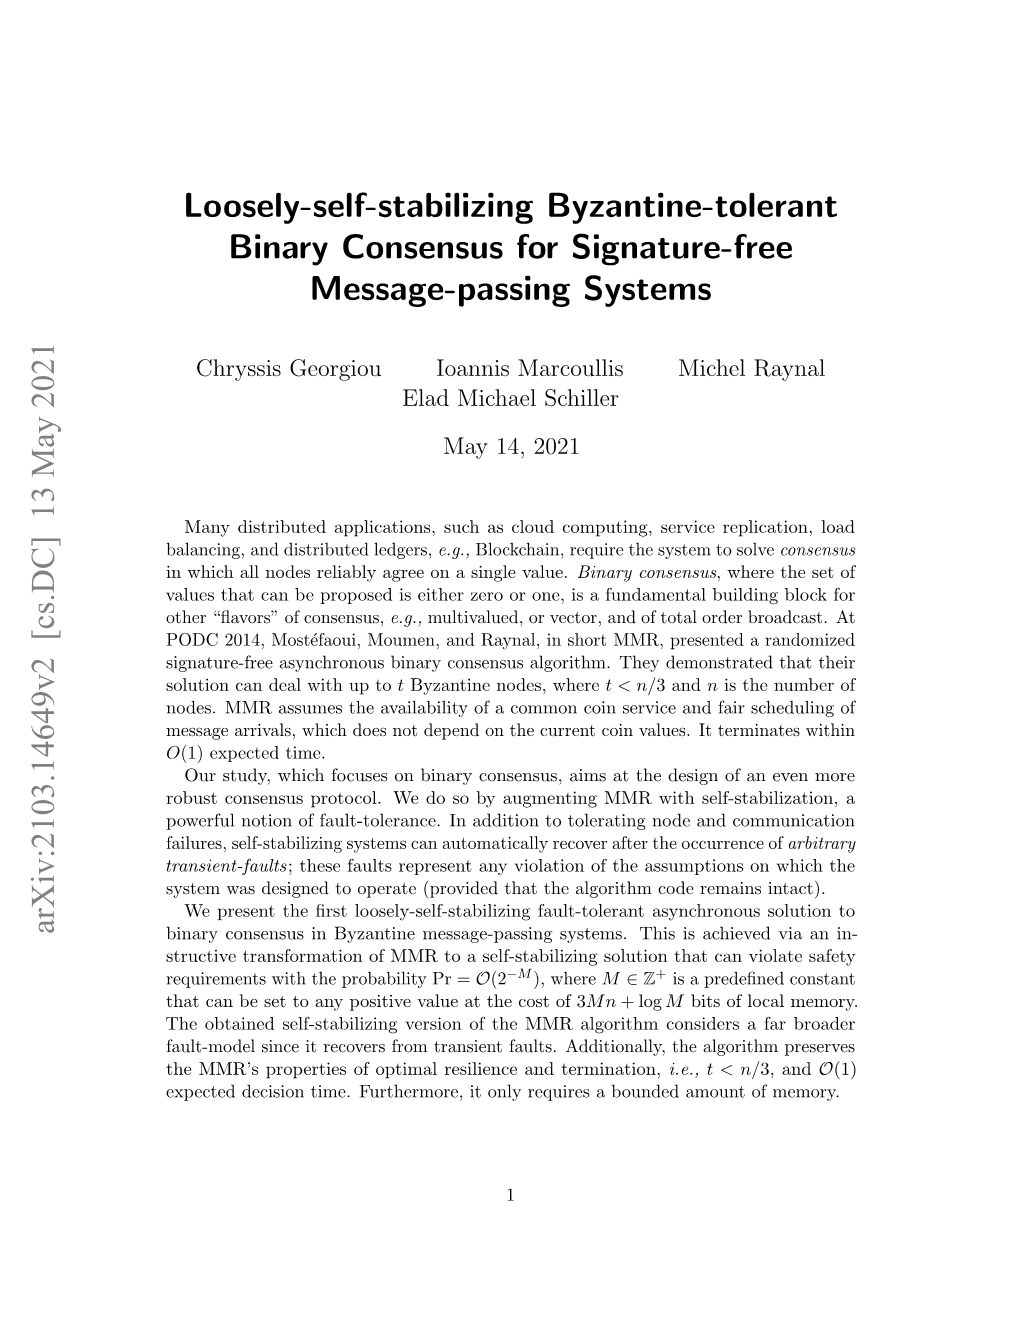 Loosely-Self-Stabilizing Byzantine-Tolerant Binary Consensus for Signature-Free Message-Passing Systems